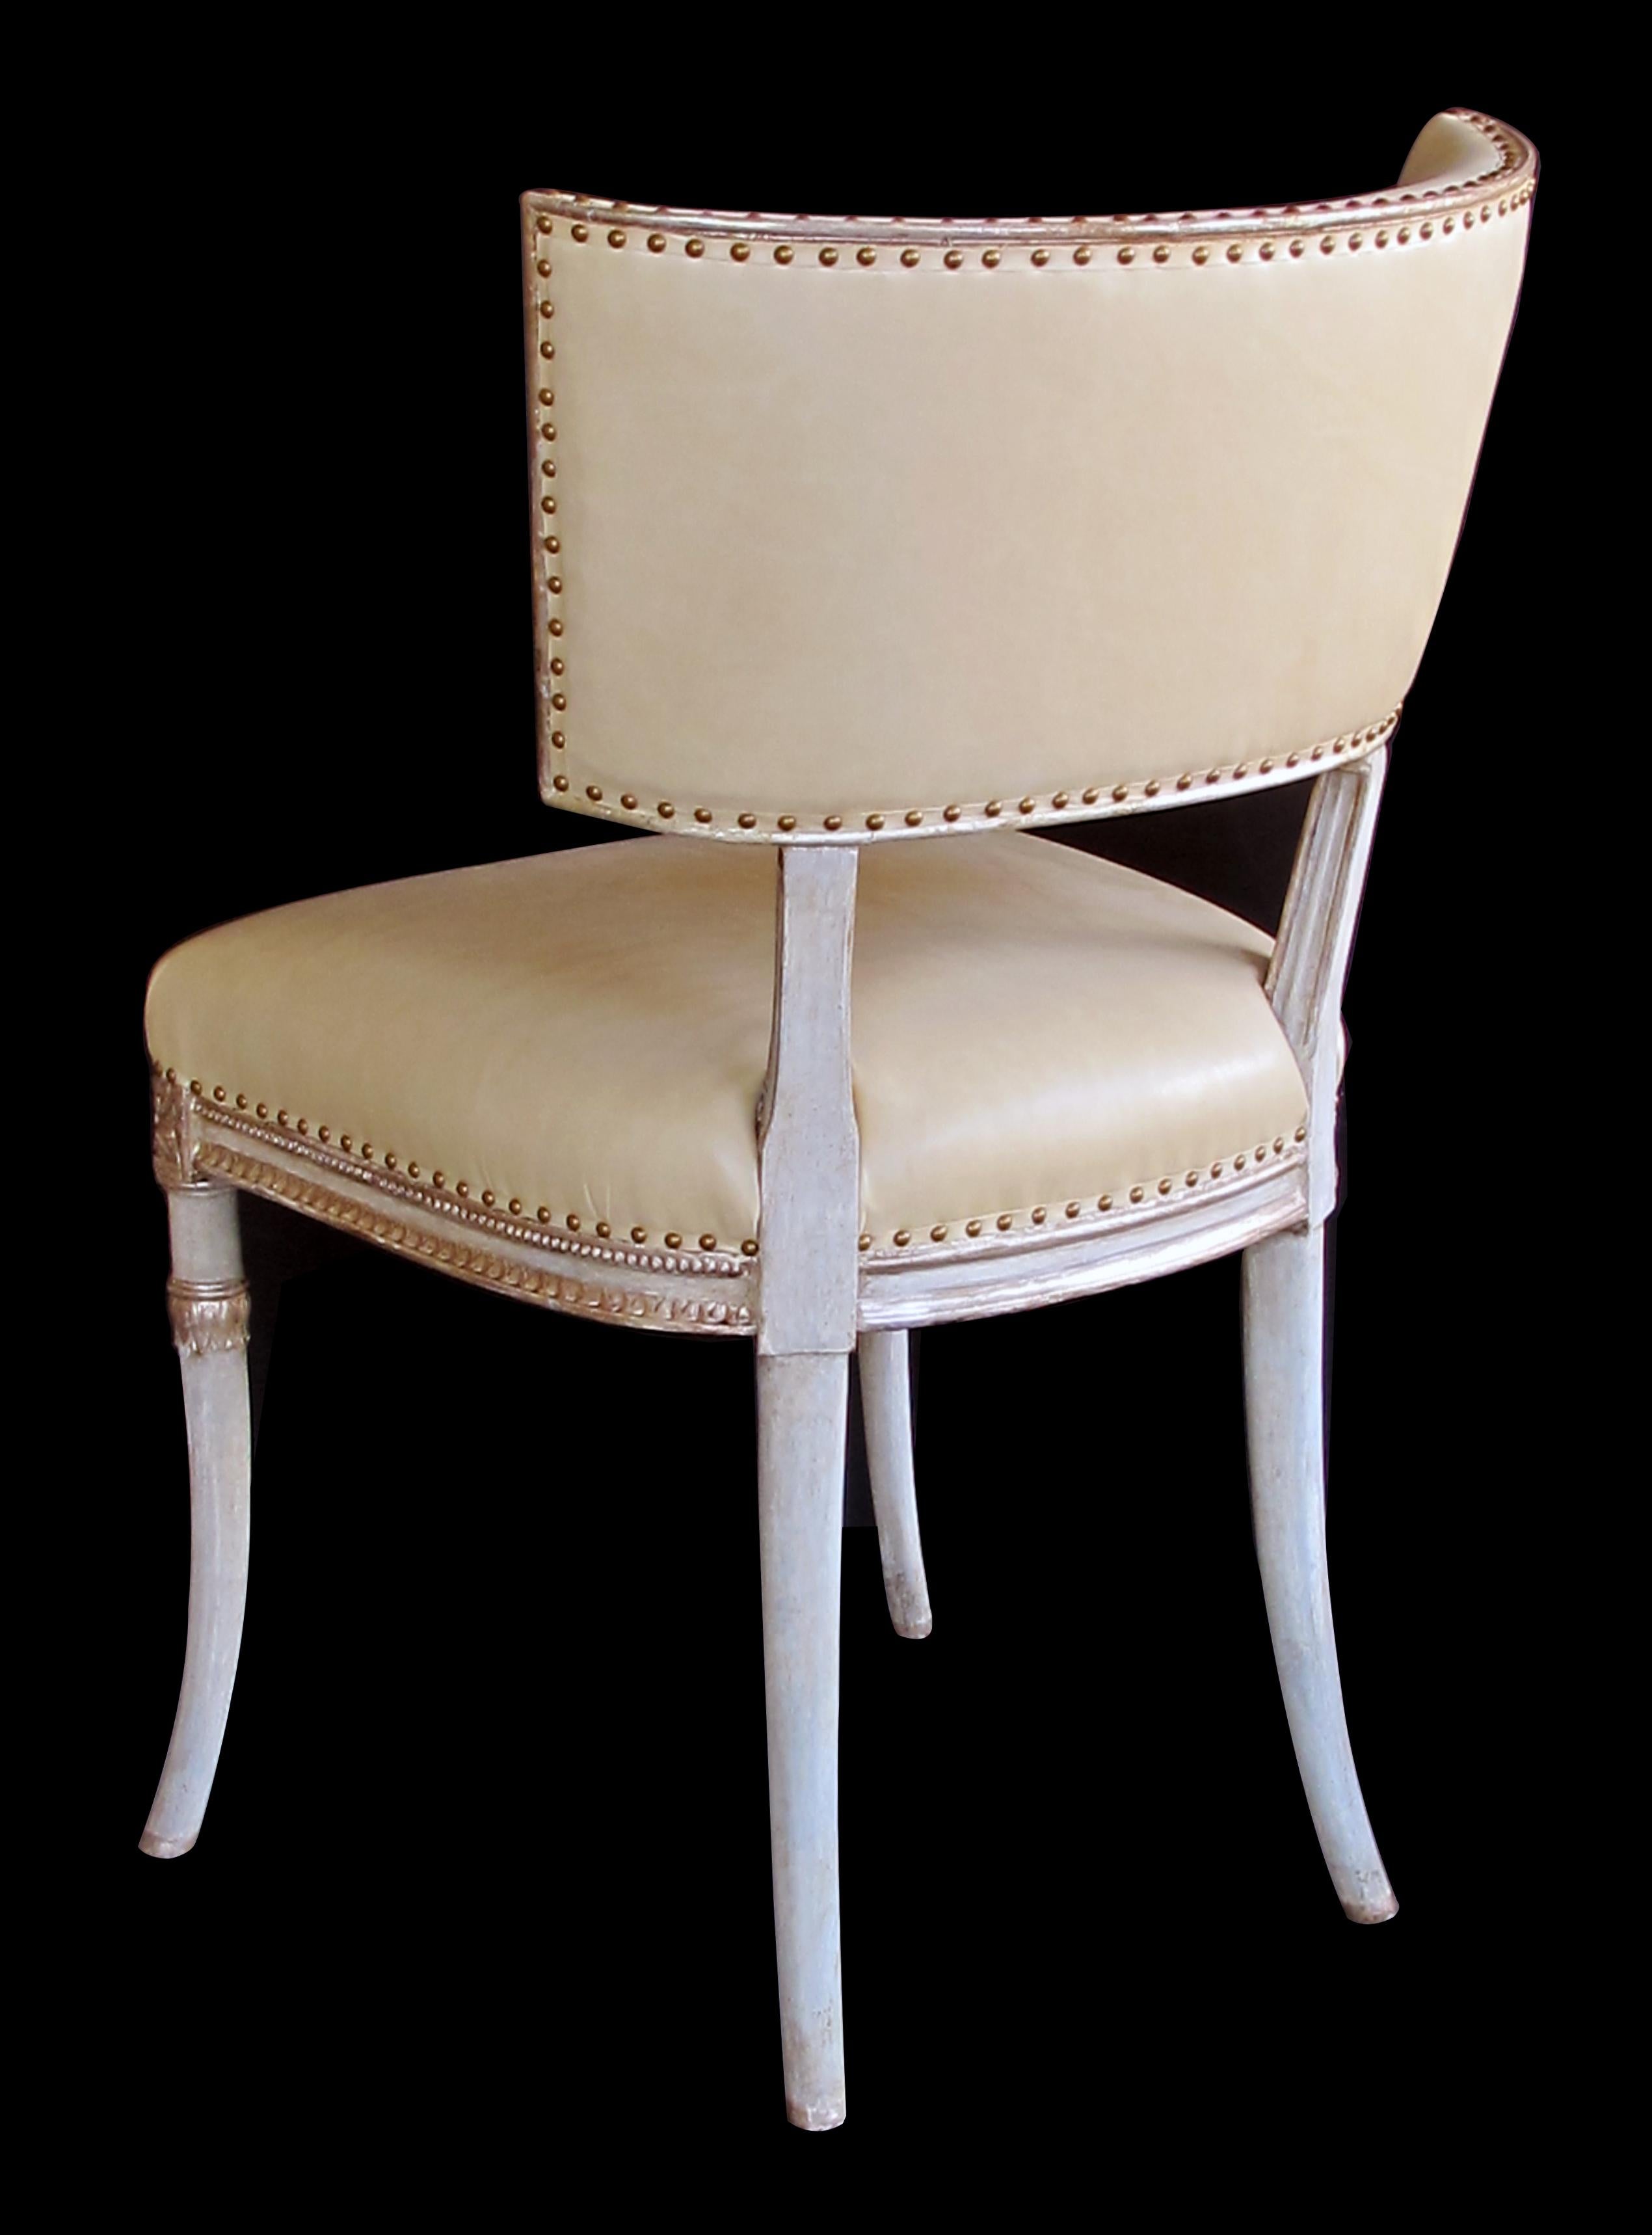 Grosfeld House Furniture Co. produced some of the most iconic, edgy and unique furniture designs of the 20th Century. Known for their superb quality, the designs were modern but had classical inspiration. This lovely Klismos-inspired side chair with